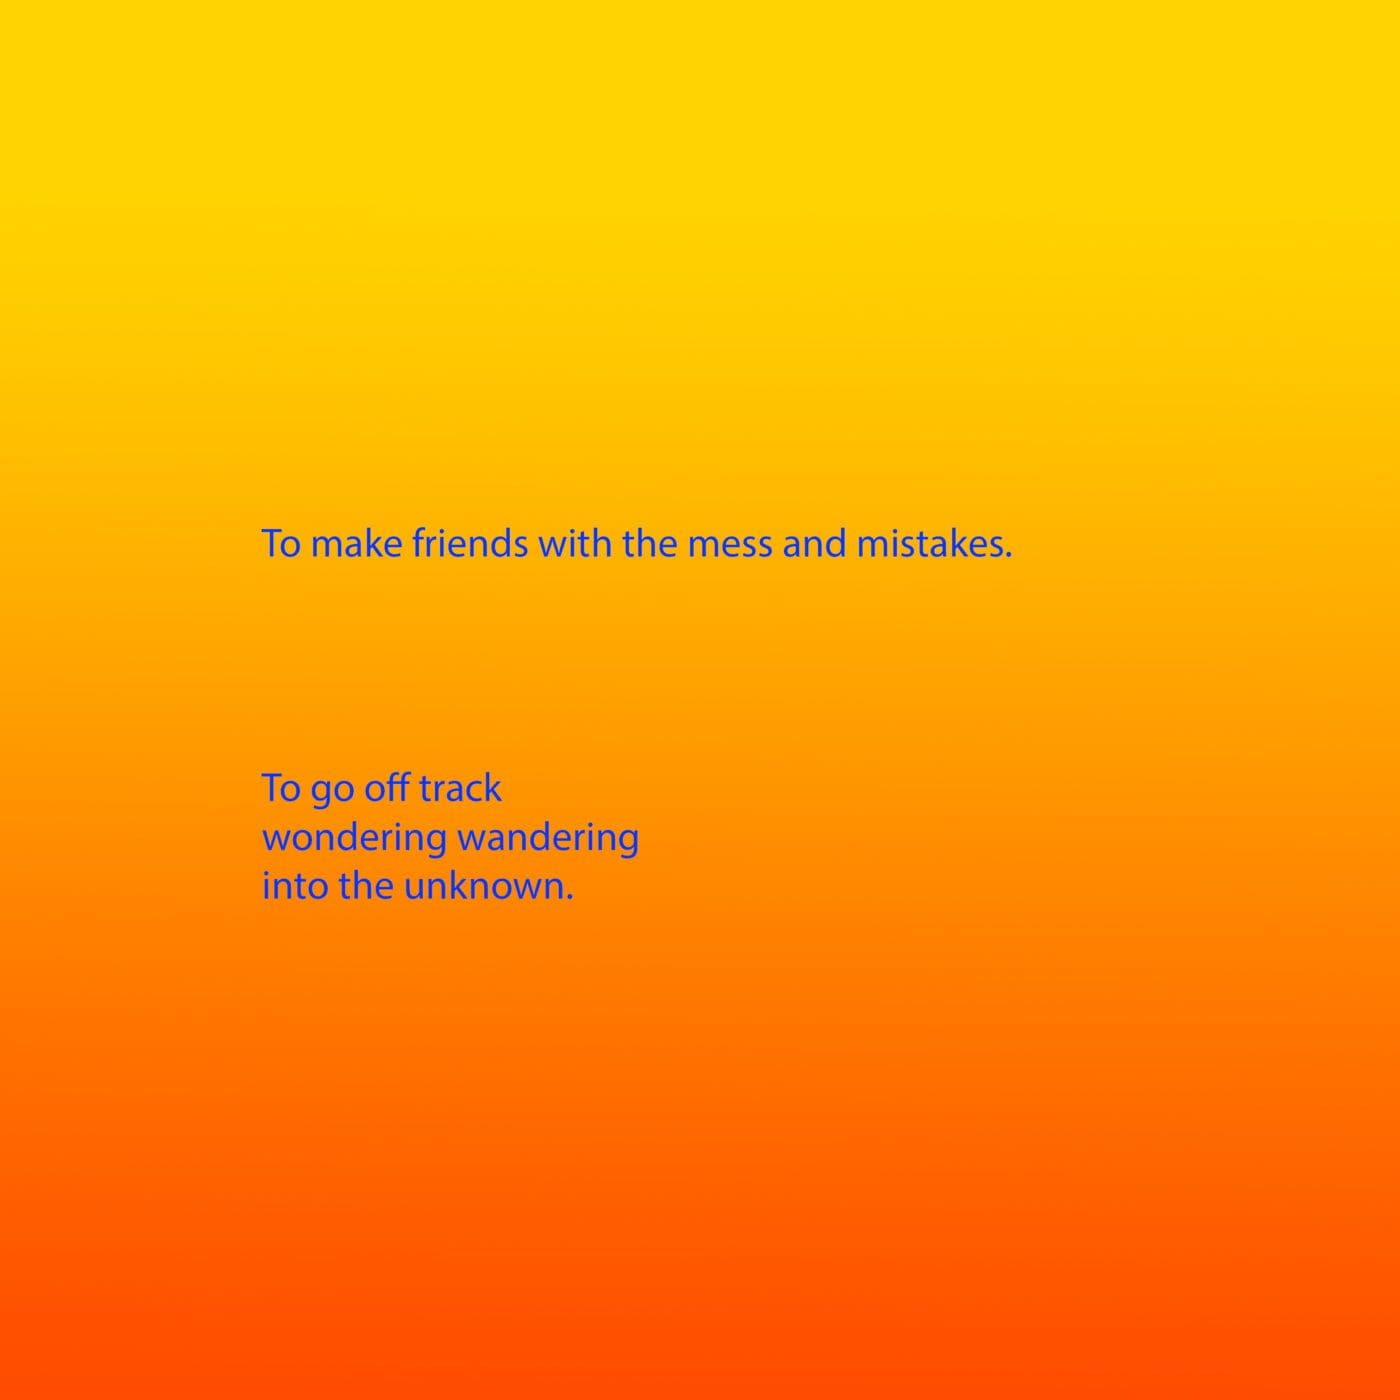 Bright blue text appears on a background that is a gradient from yellow, through orange to red. The text reads: To make friends with the mess and mistakes. To go off track wondering wandering into the unknown.